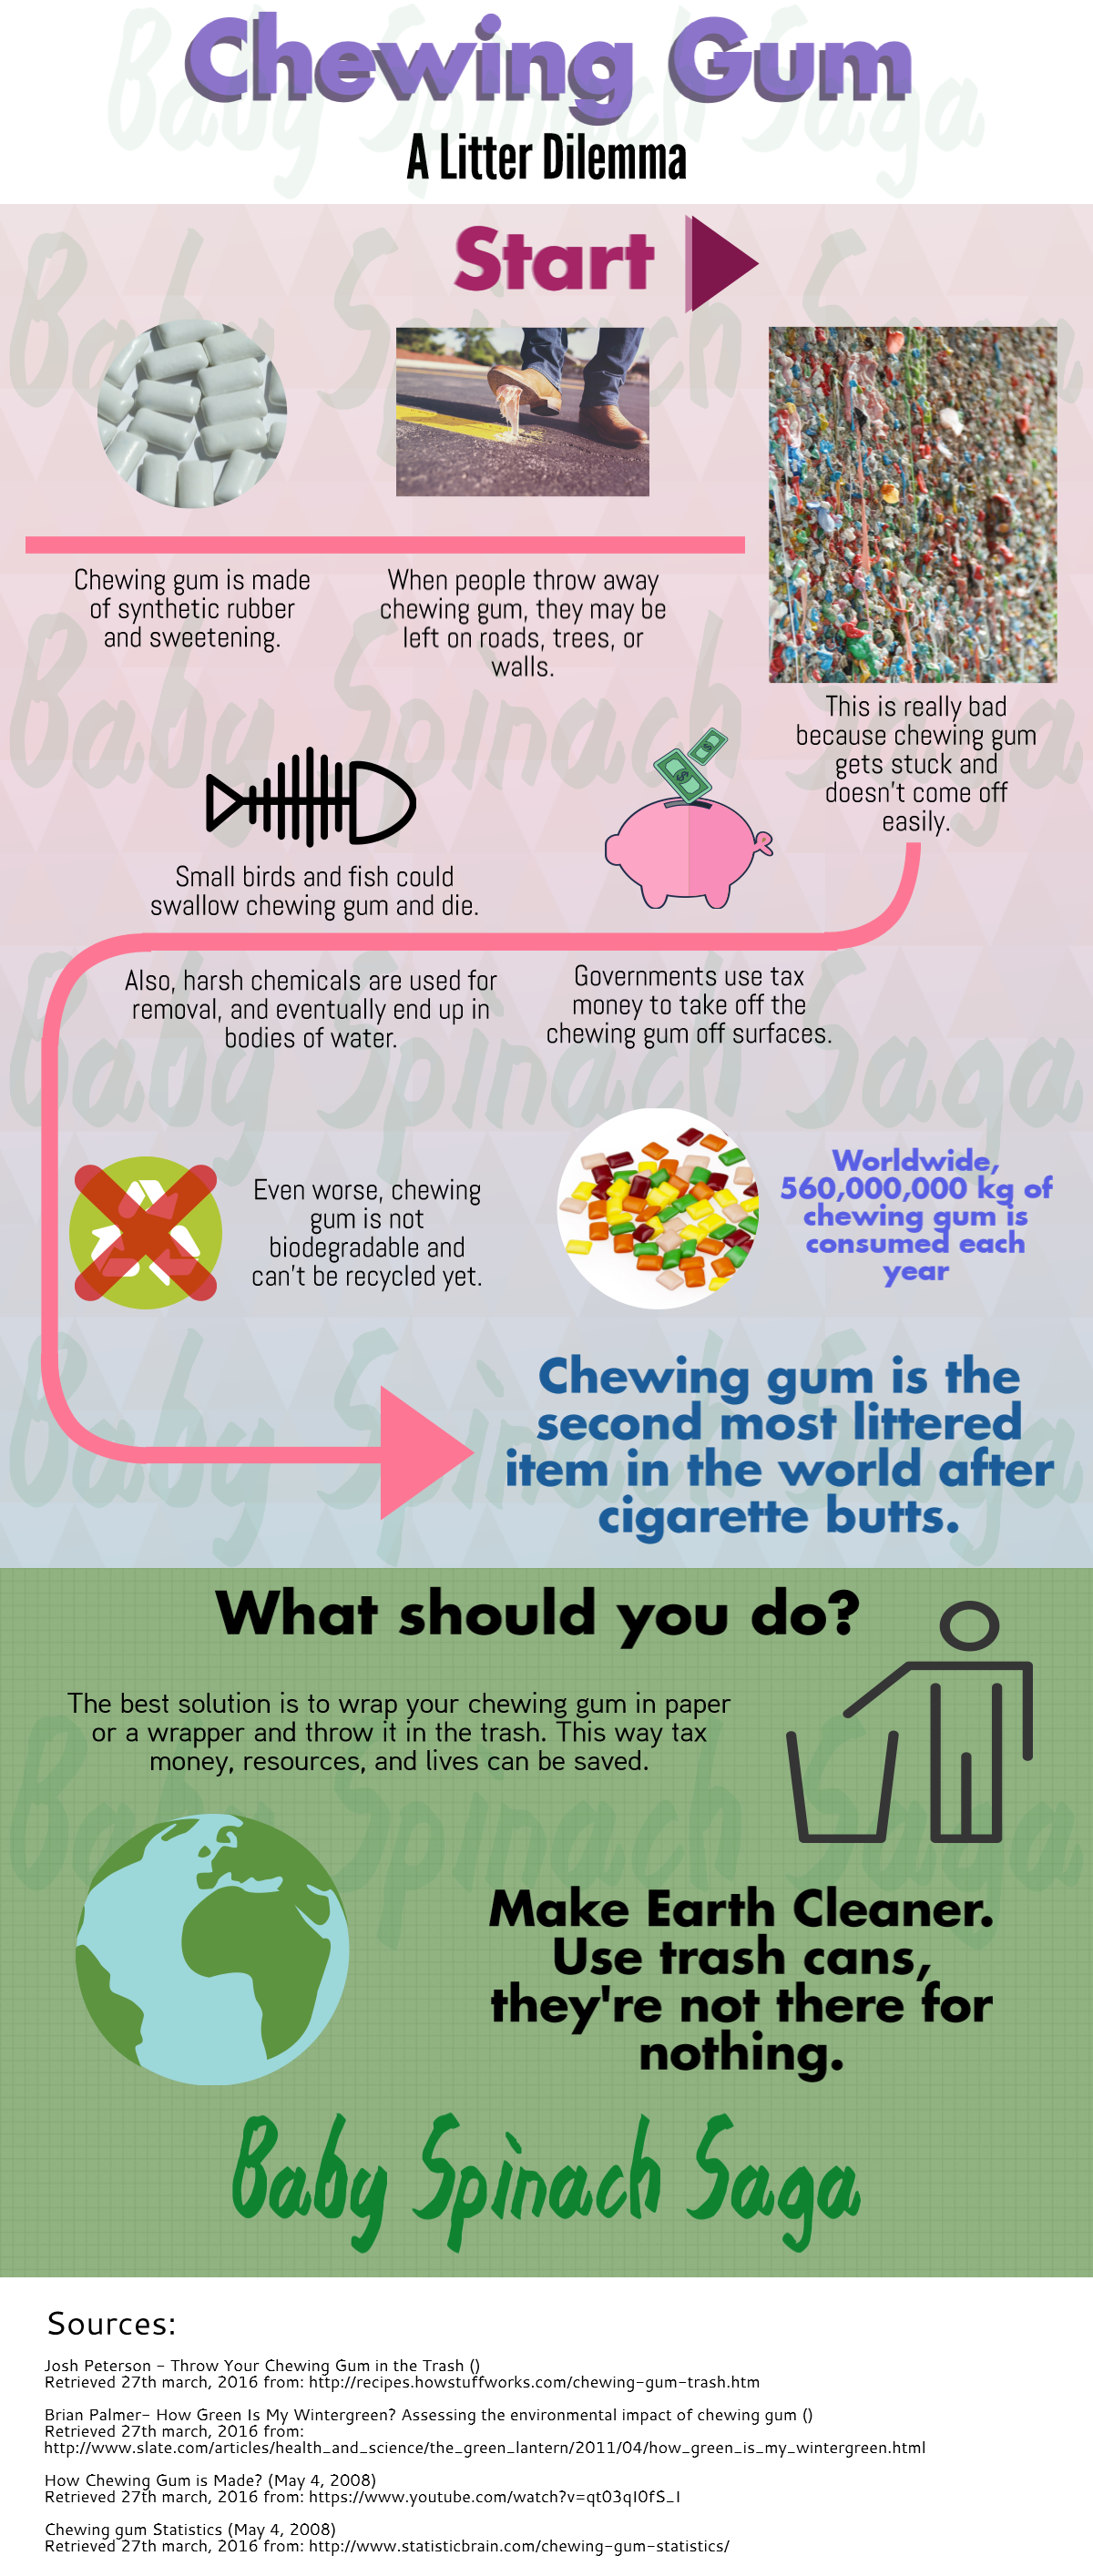 chewing-gum-litter-infographic-baby-spinach-saga